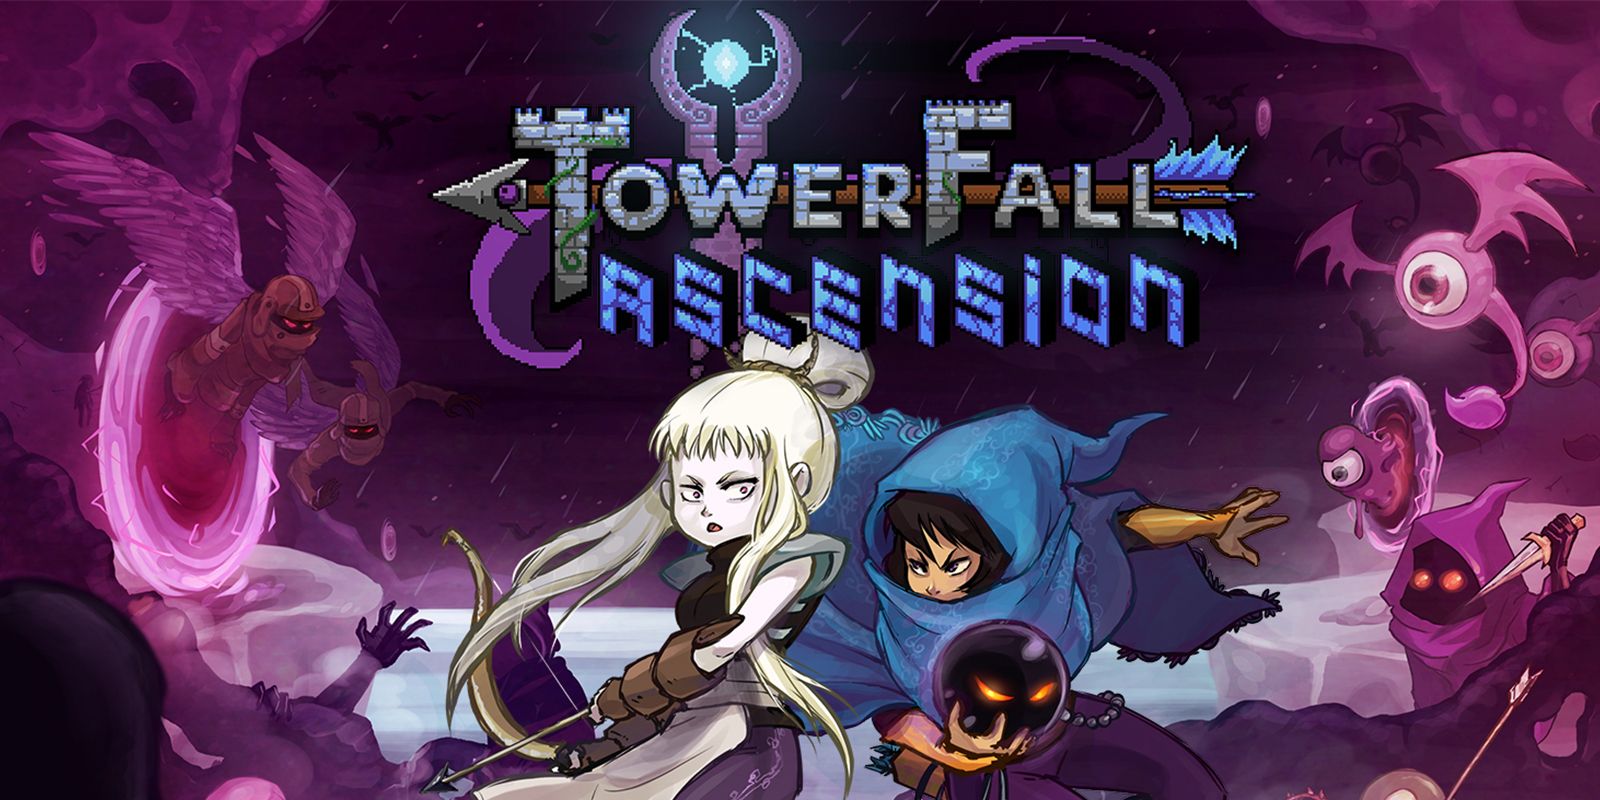 Cover art for TowerFall Ascension